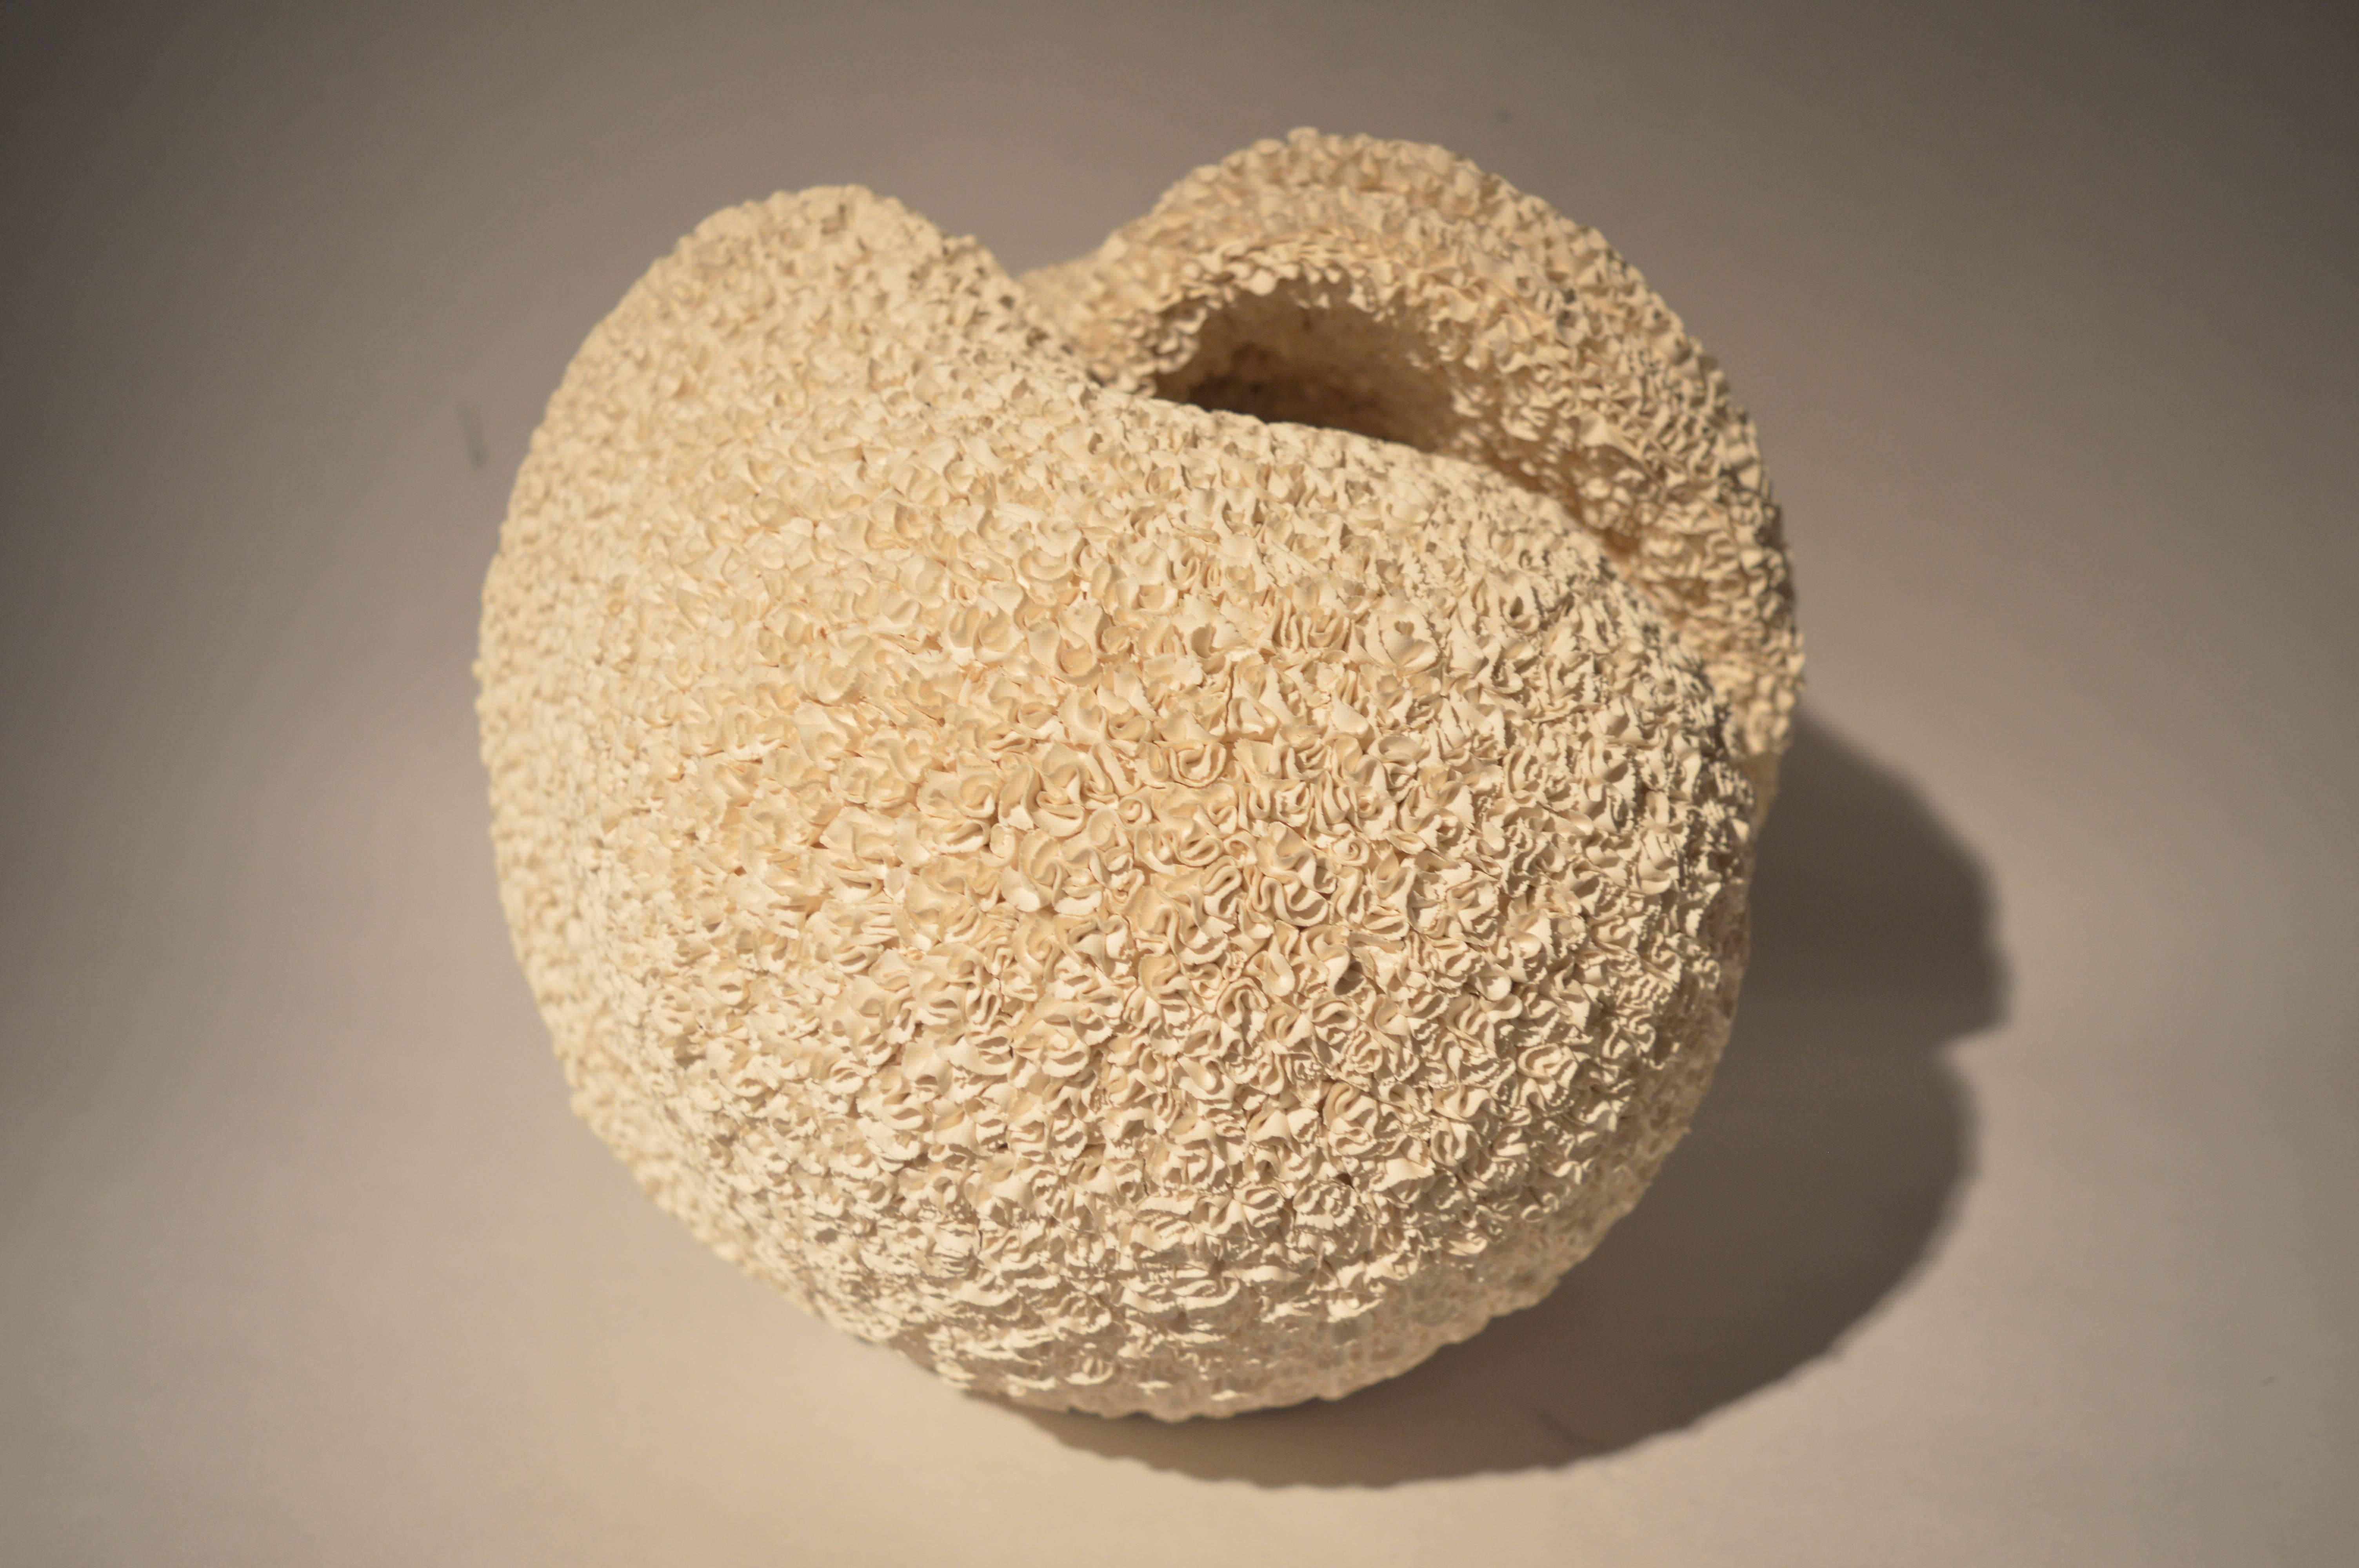 Japanese contemporary vase Signed Makiko Hattori
Swirling rounded vase with upraised ridges and tiny bundles of shaved clay covering the entire surface.
Title : 